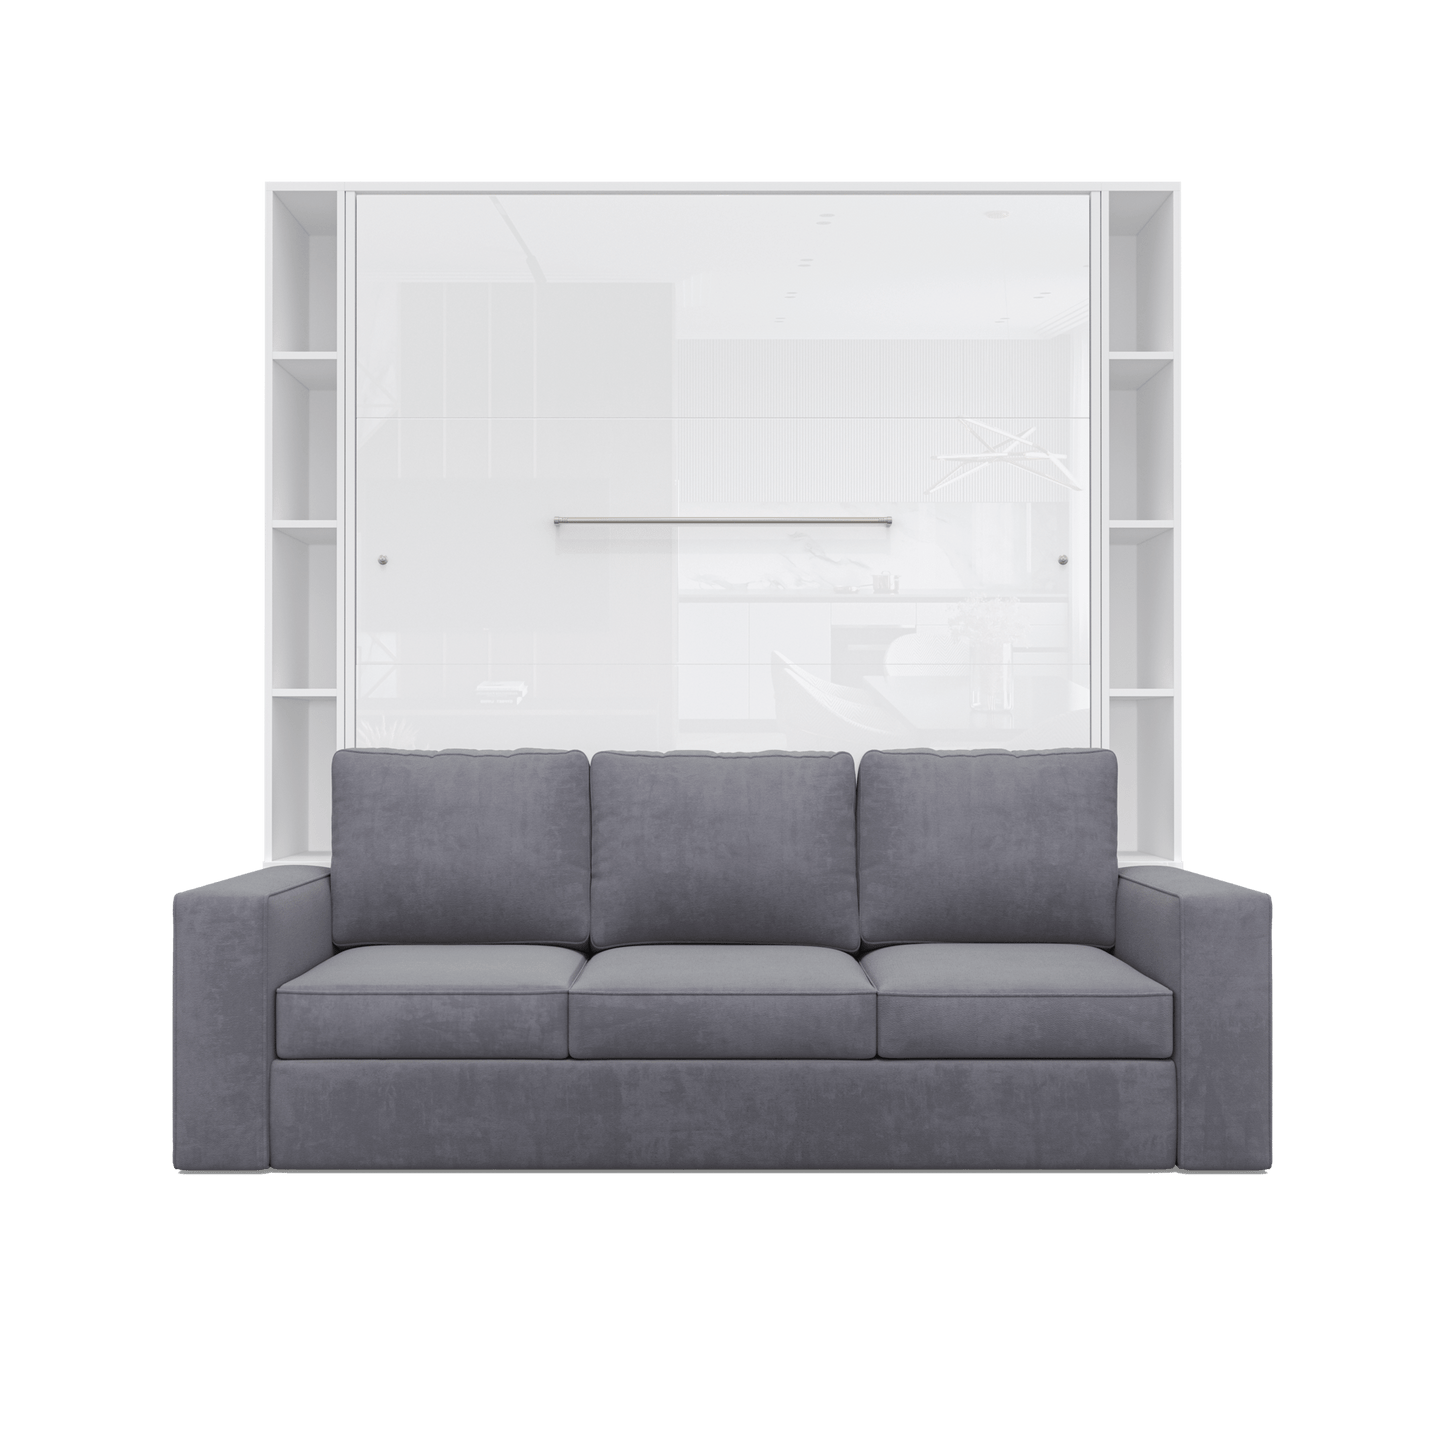 Maxima House Maxima House Vertical European Queen size Murphy Bed Invento with a Sofa and two Cabinets White/White + Grey IN014/23W-G